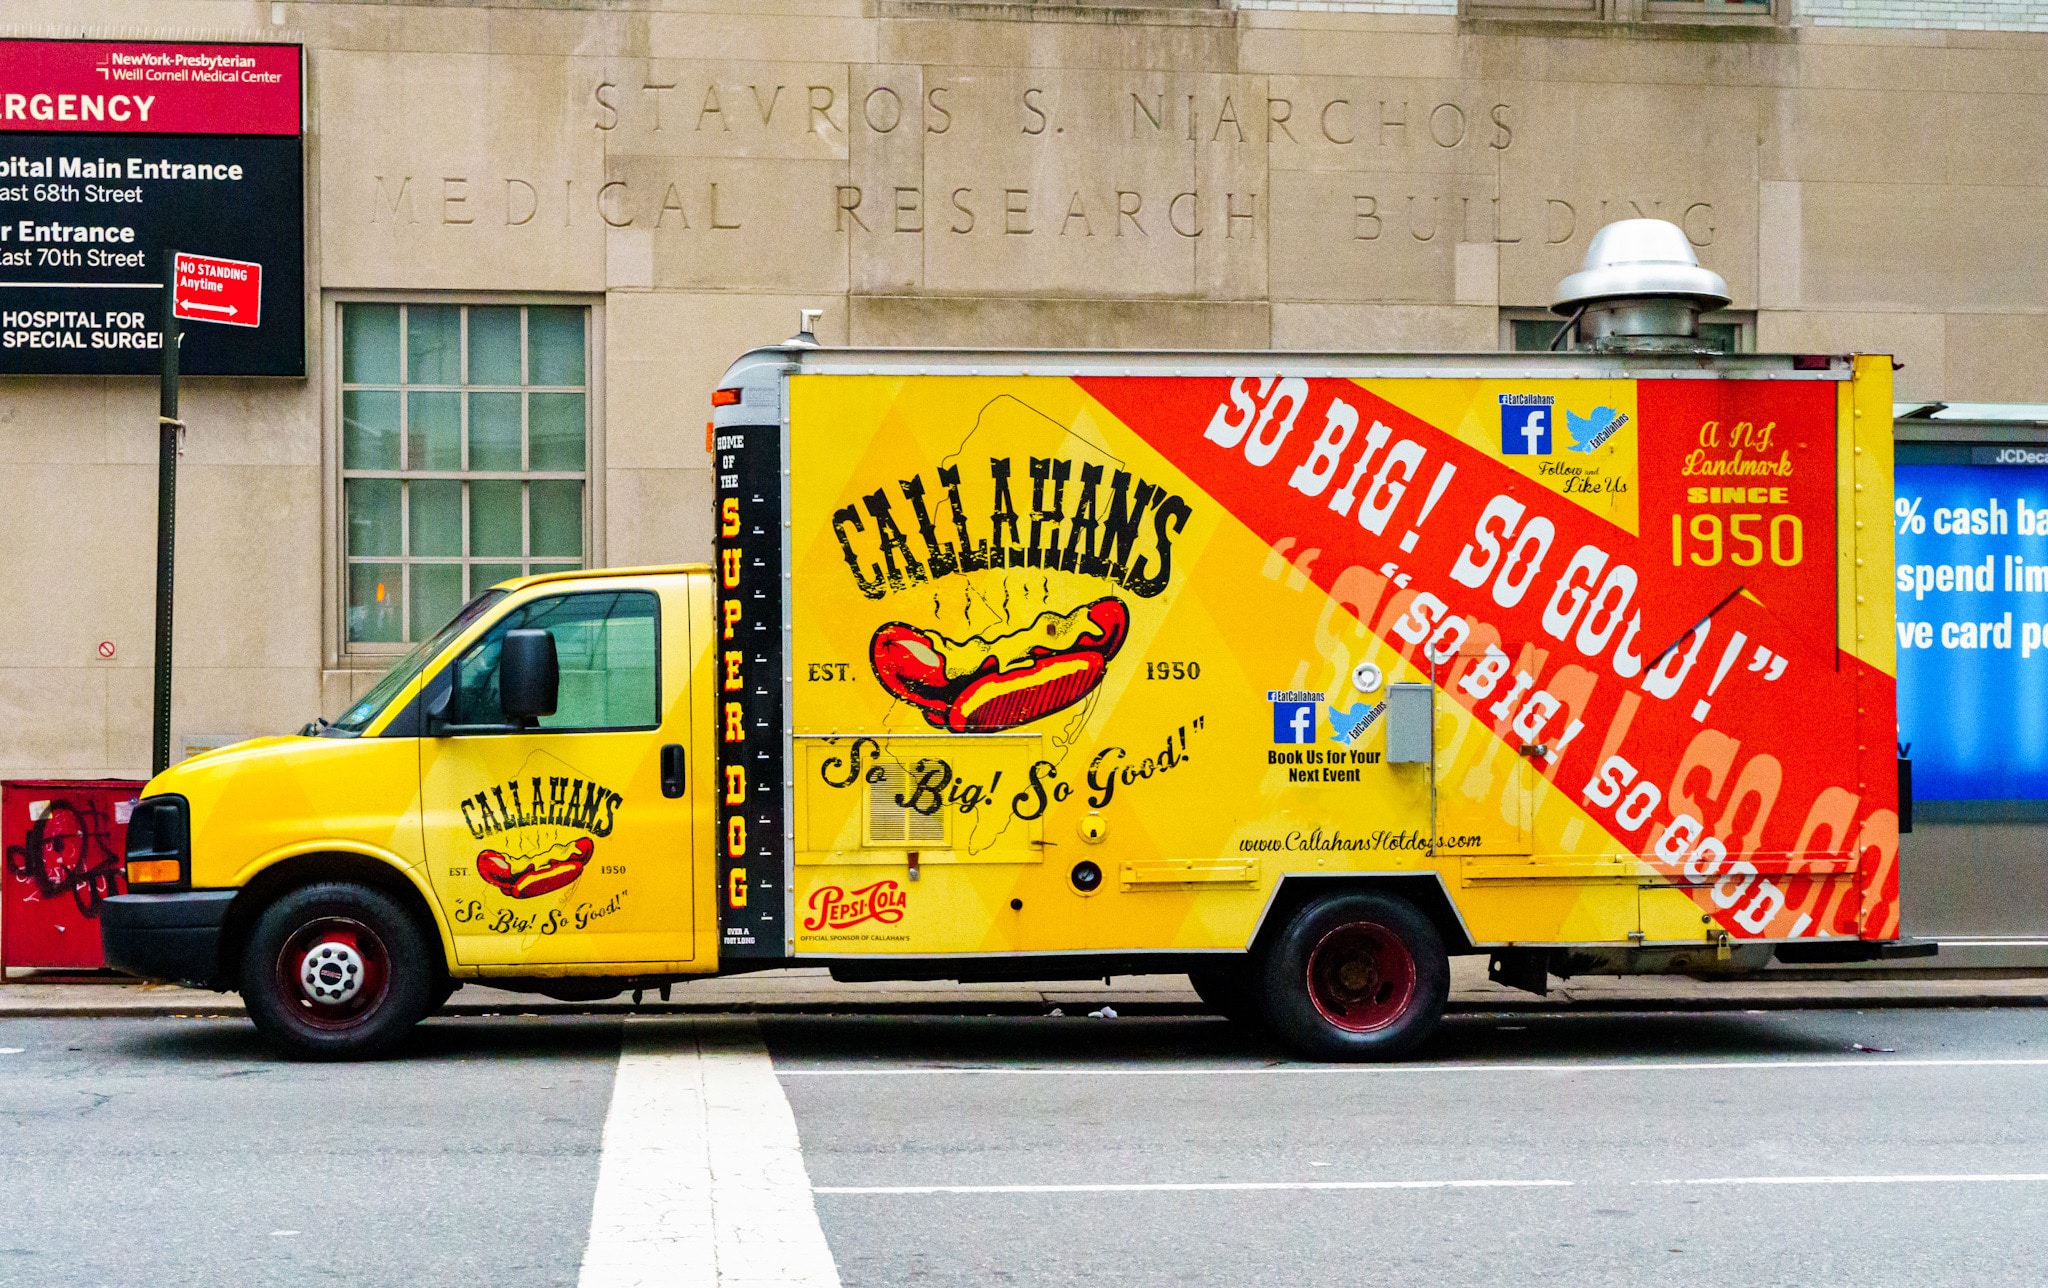 callahans food truck parked outside of stavros marchos medical research